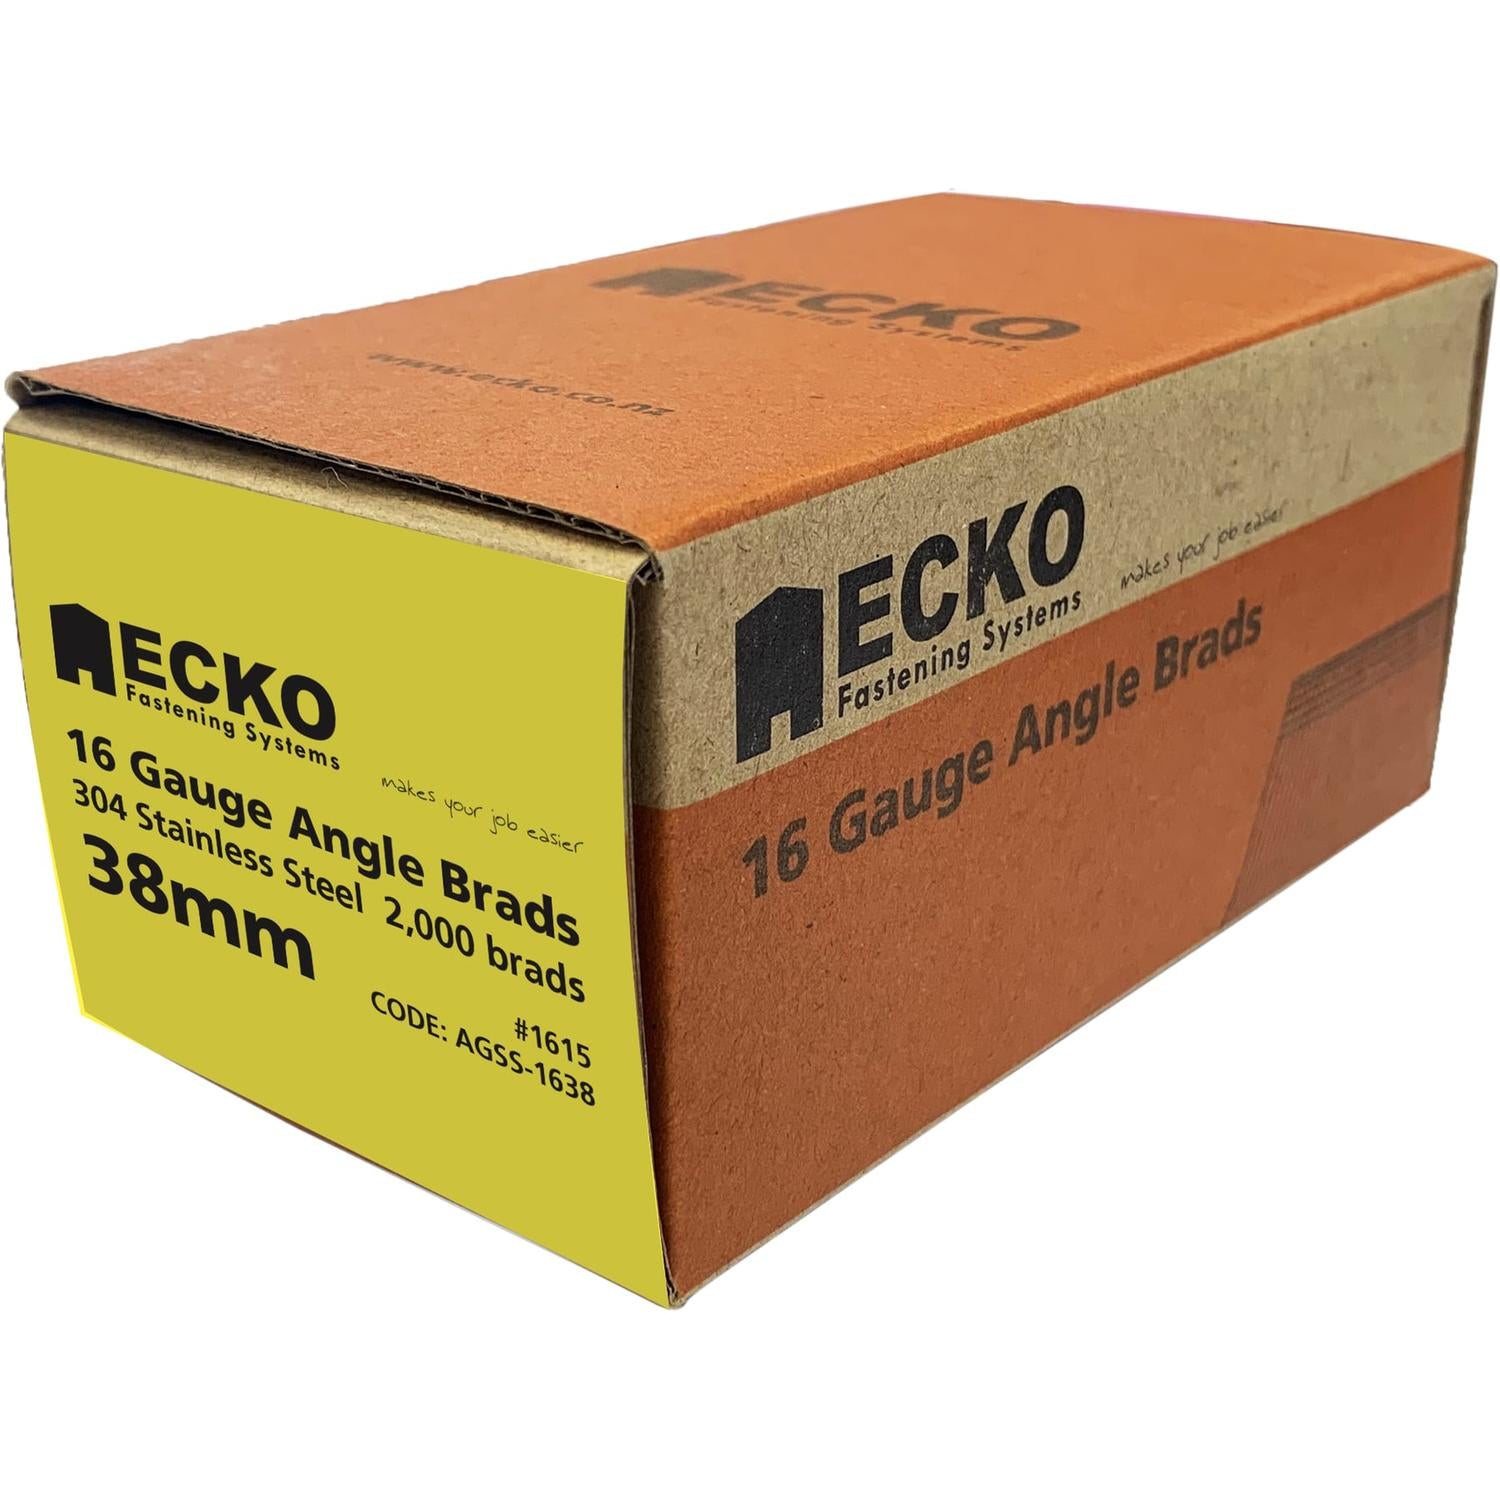 Ecko 16 Gauge Angle Brads Gasless Pack 38 X 1.6Mm 304 Stainless Steel (2000)